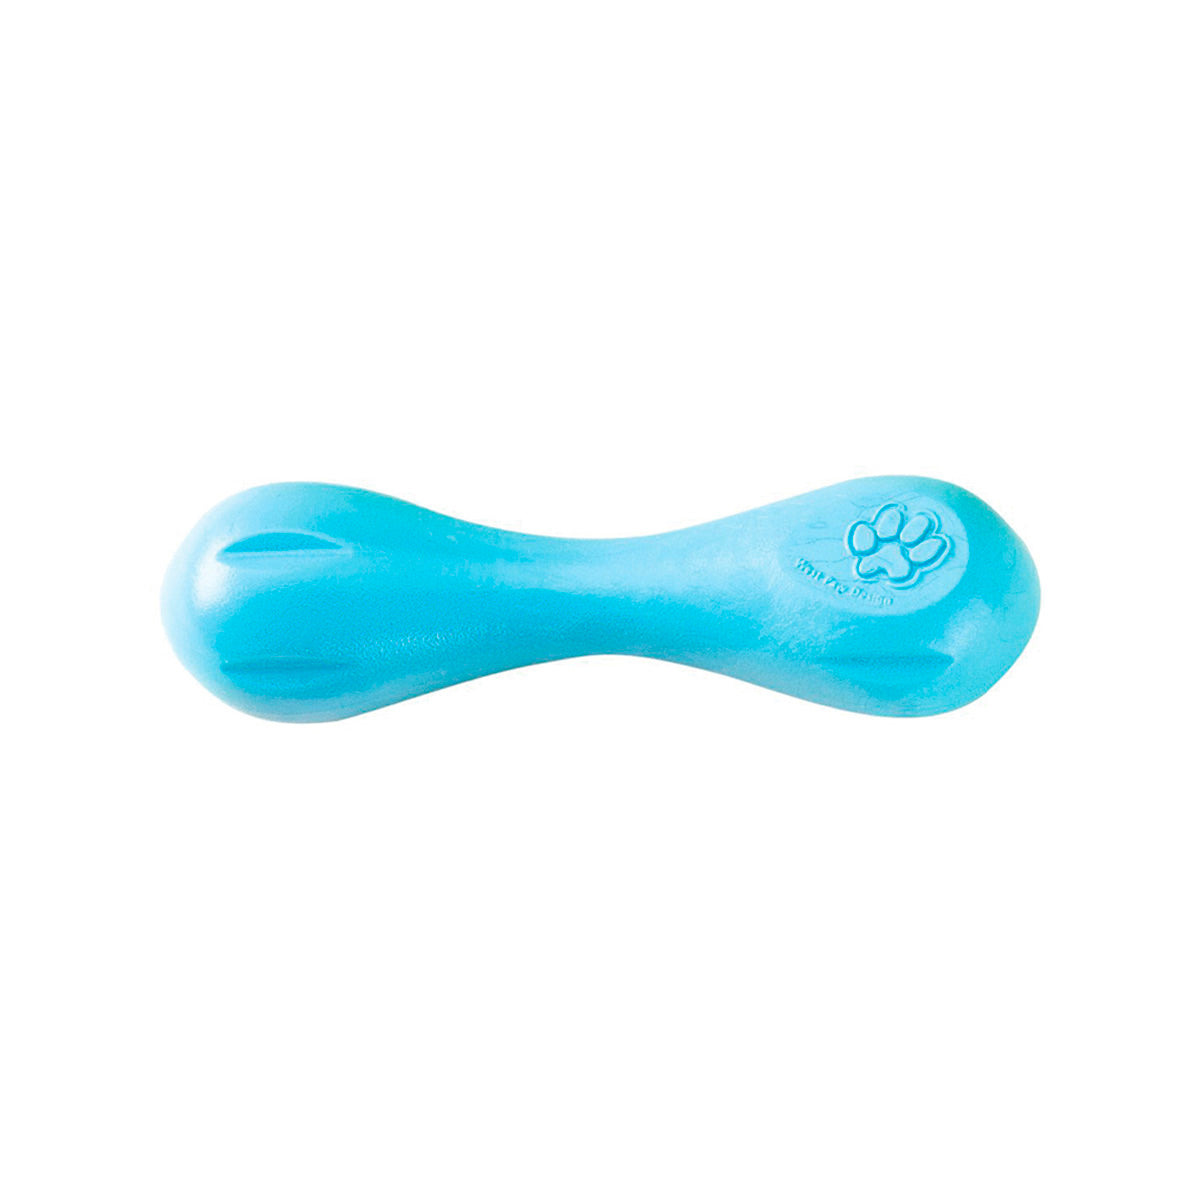 HURLEY SMALL 15.2 CM BLUE WEST PAW